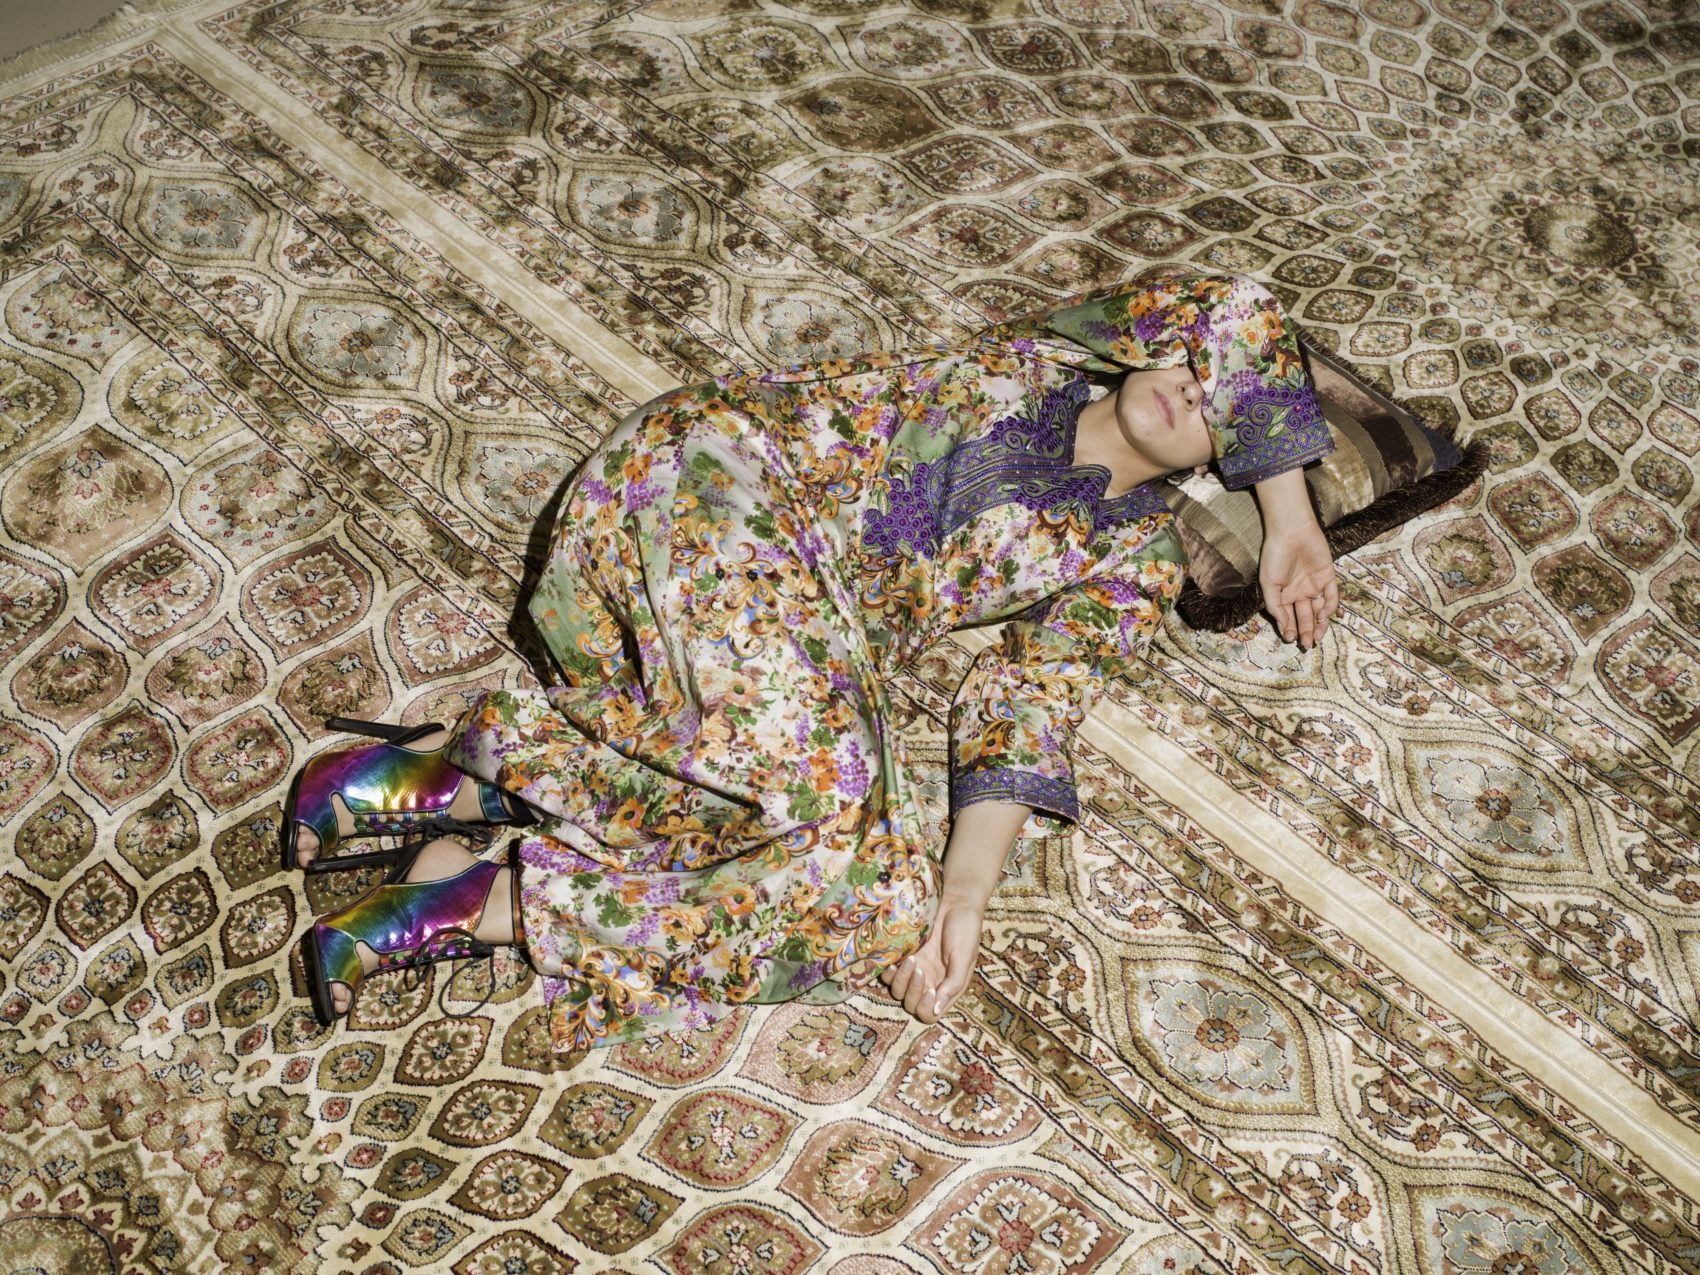 Farah Al Qasimi, &quot;M Napping on Carpet,&quot; 2016. (Courtesy the artist; Helena Anrather, New York; and the Third Line, Dubai)